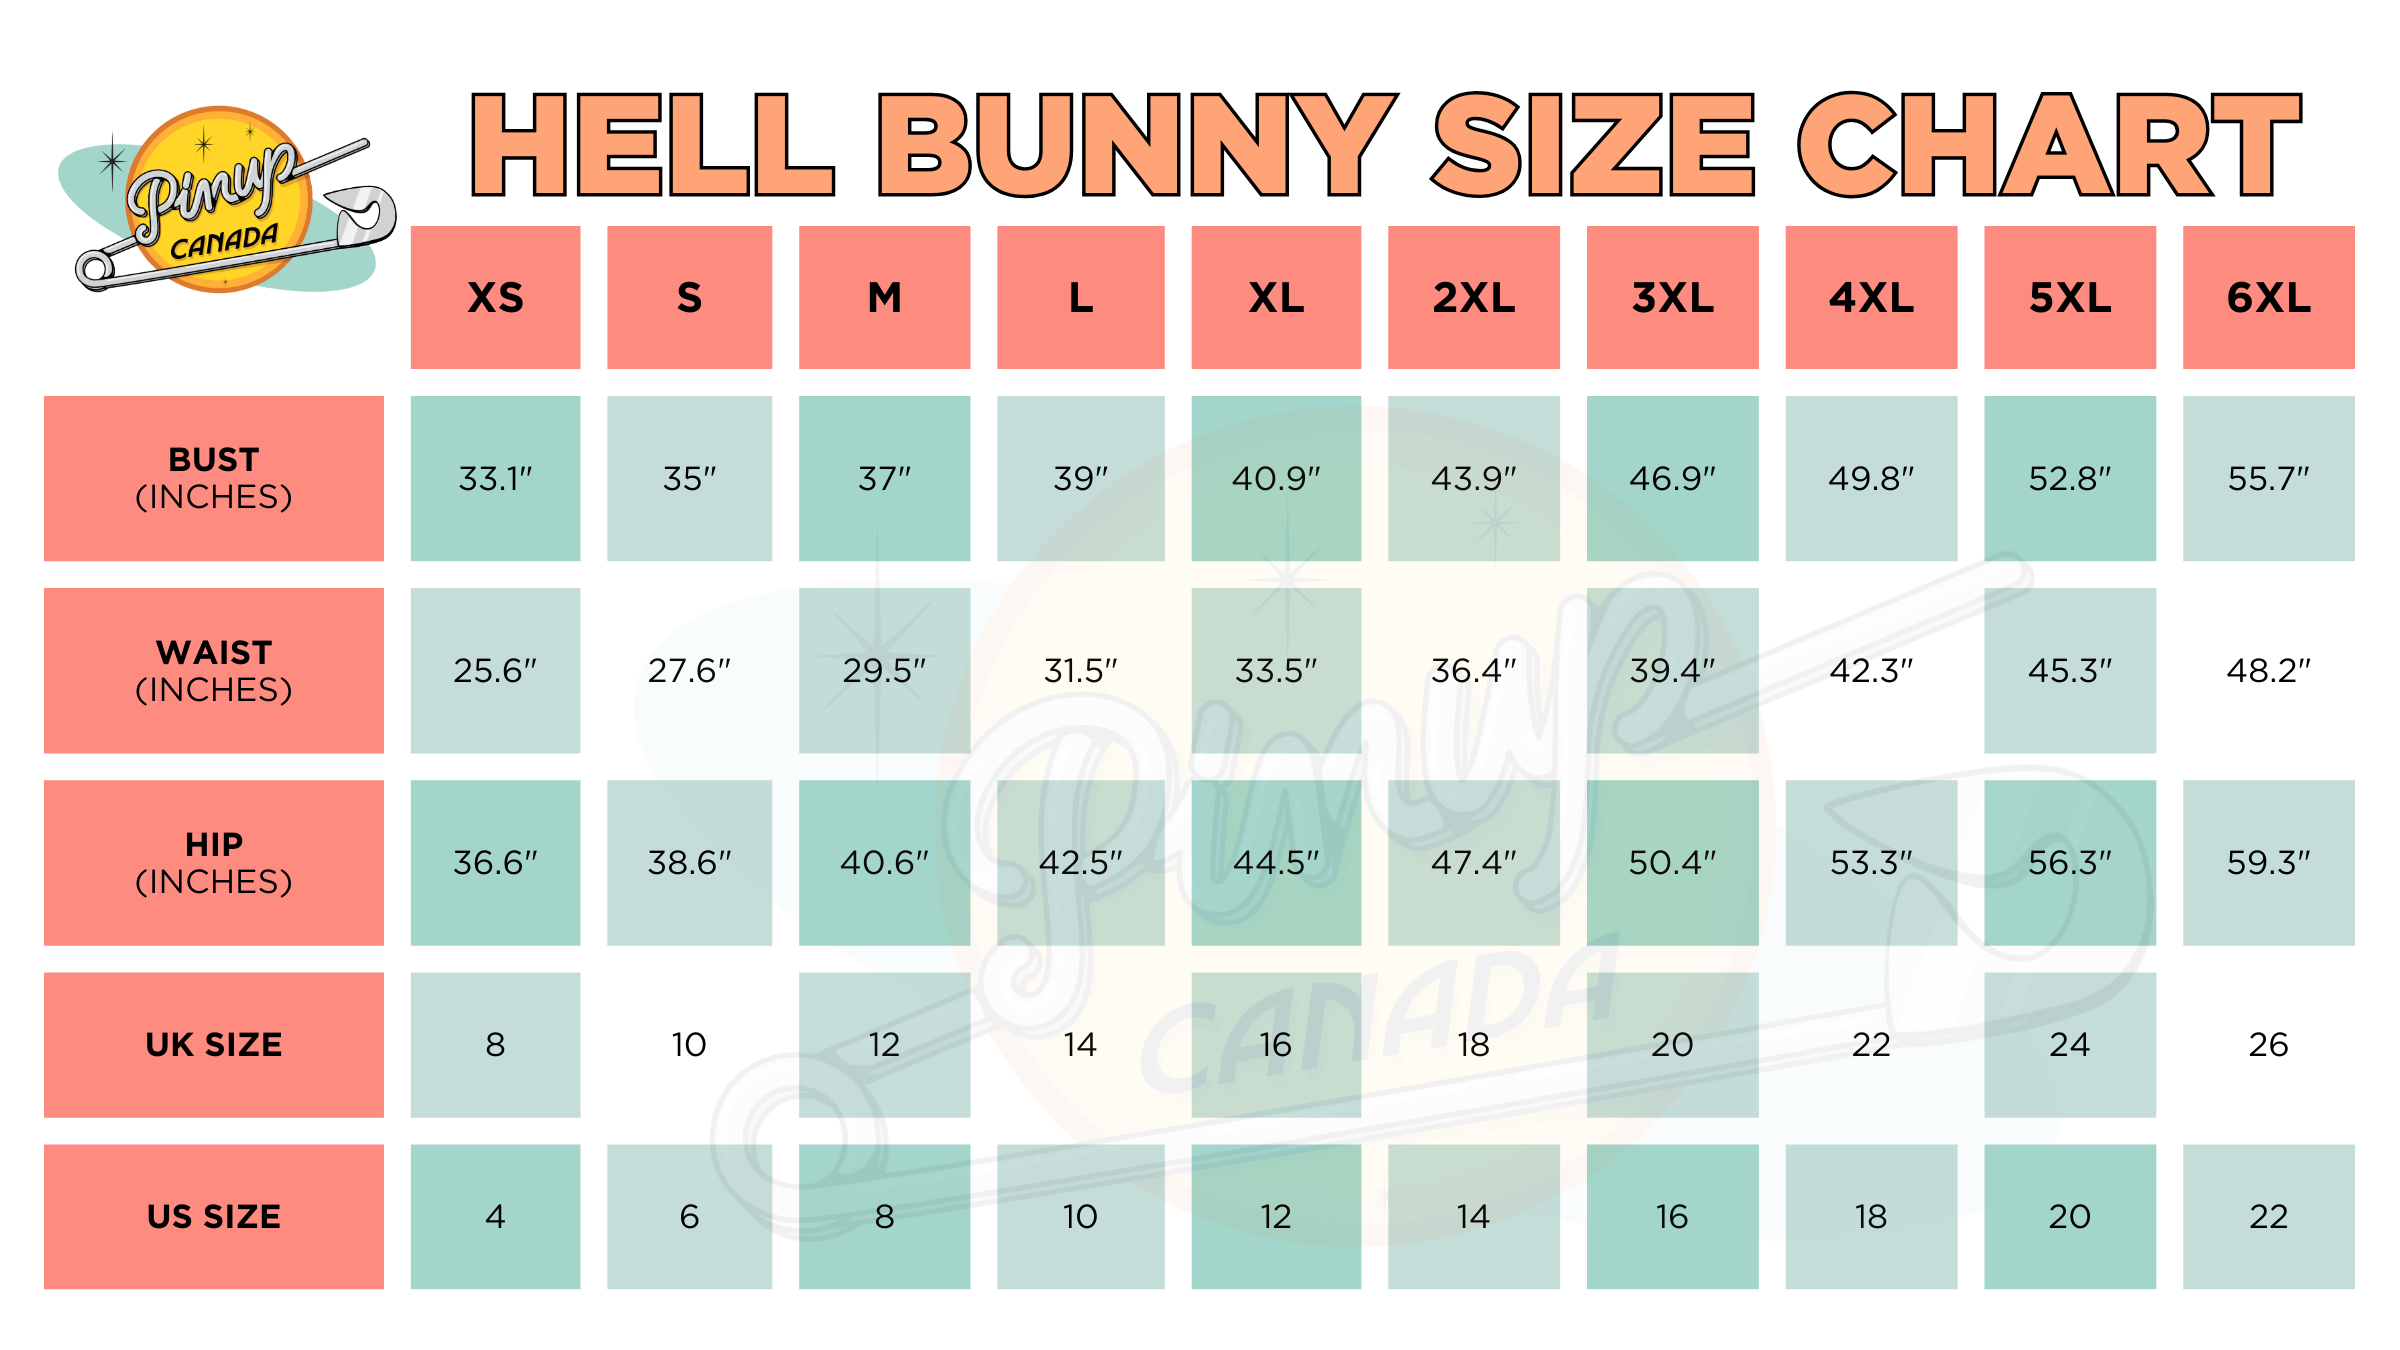 Hell Bunny Size Chart